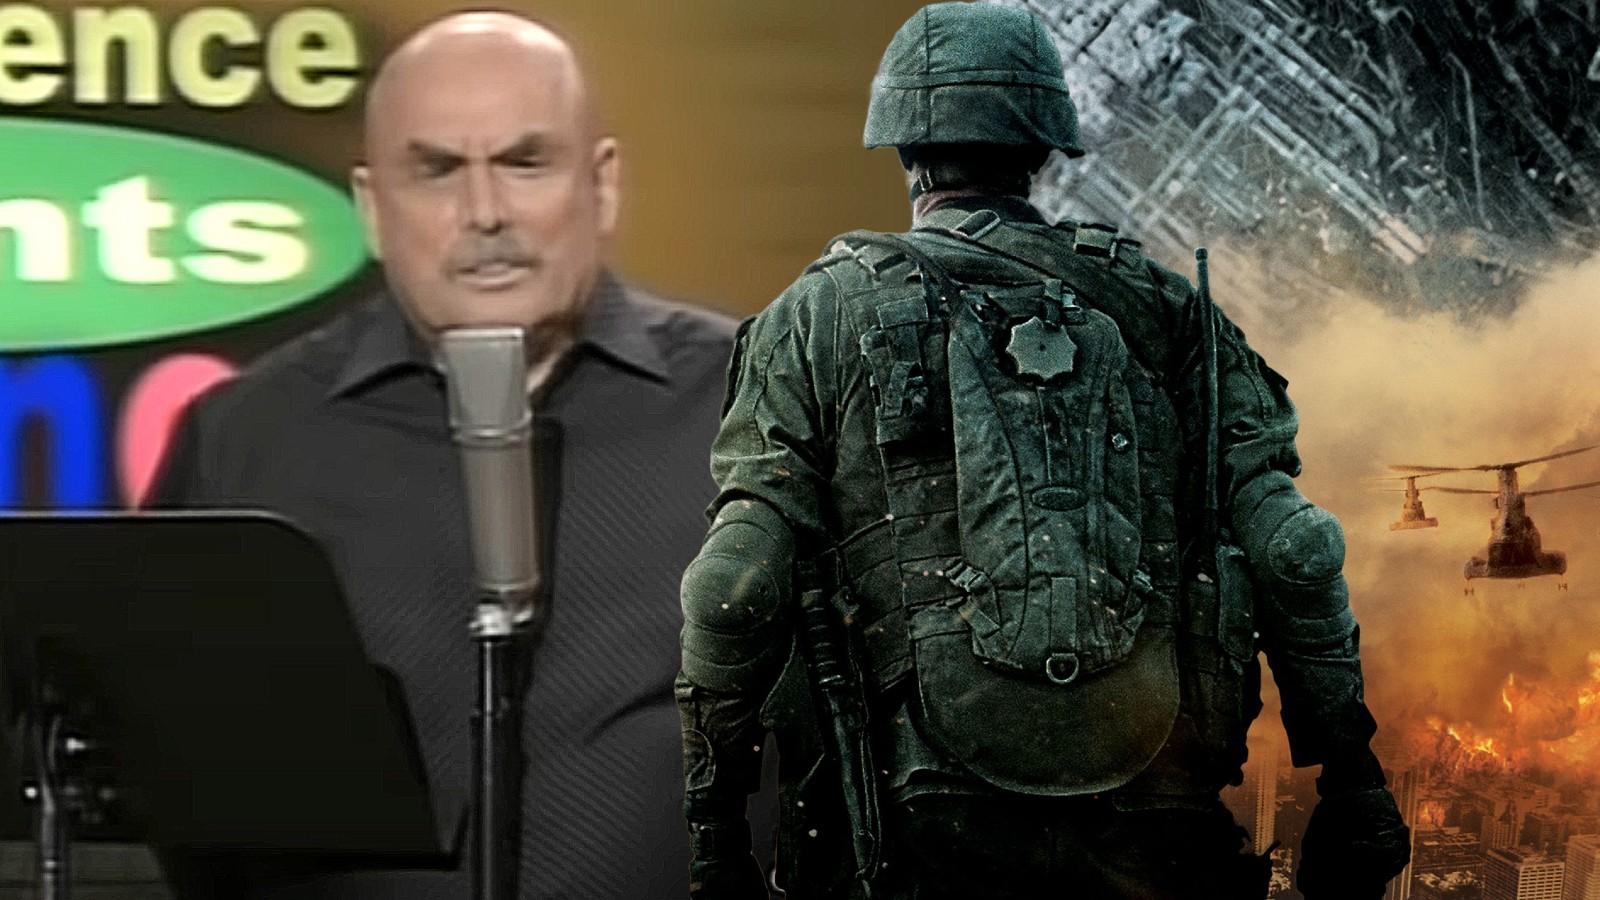 Don LaFontaine and a still from Battle Los Angeles